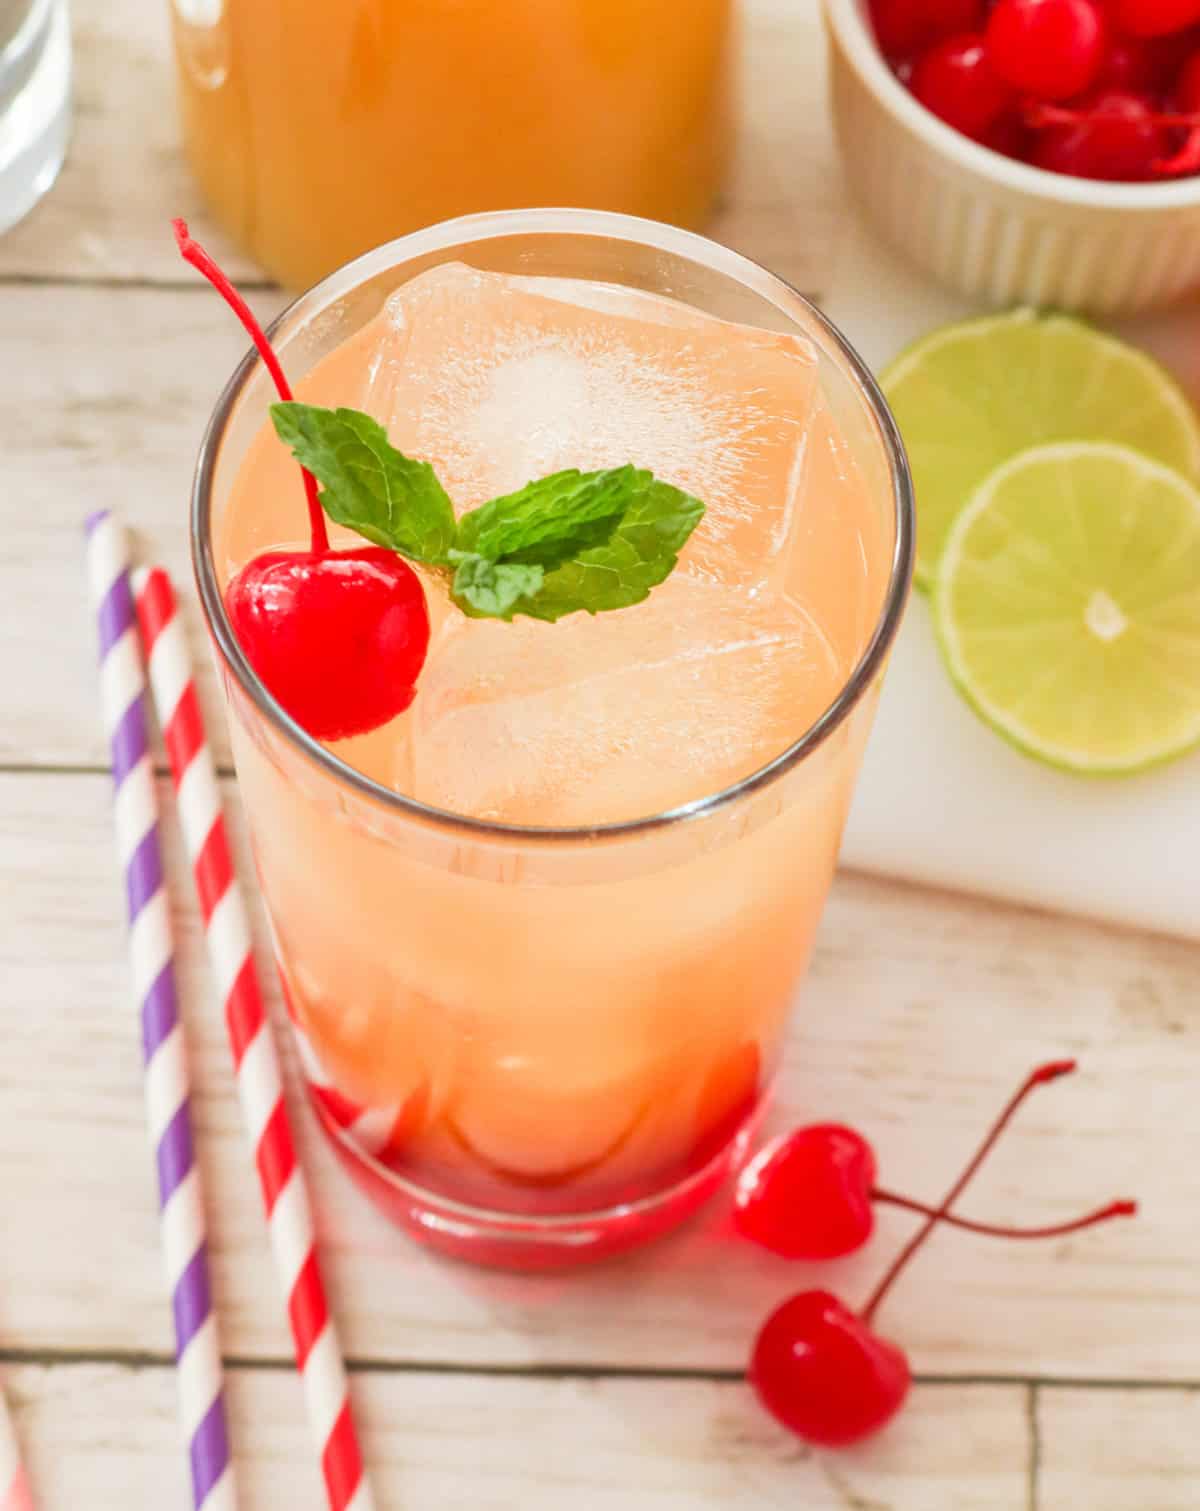 Enjoy the bold mix of flavors in a Shirley Temple drink